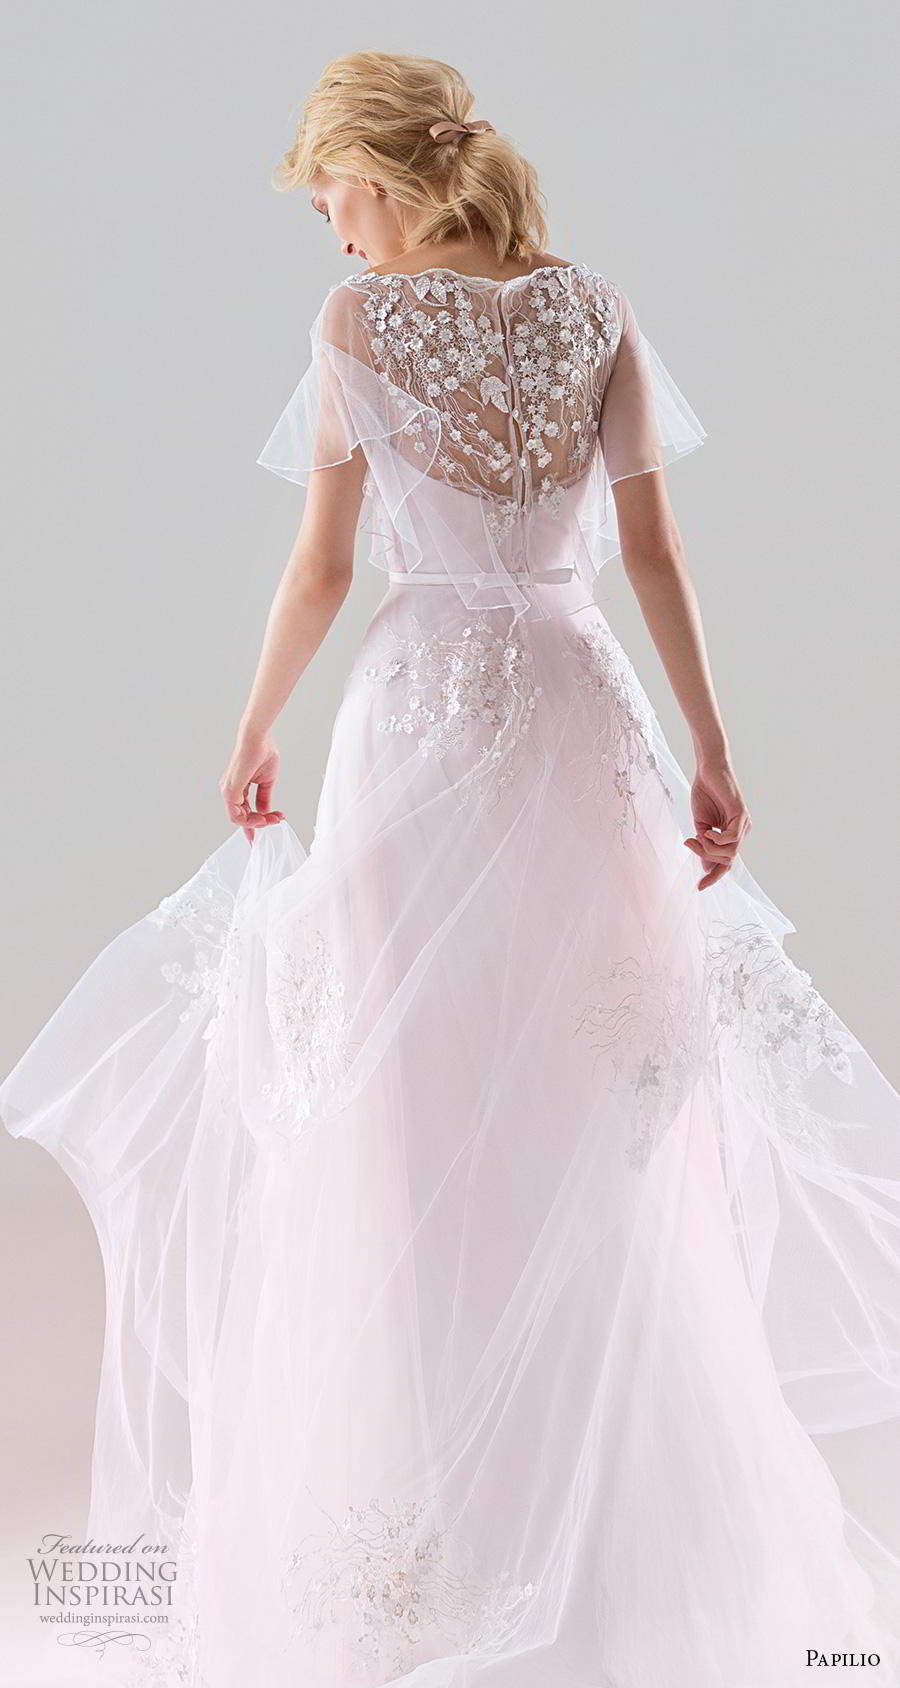 papilio 2019 bridal short butterfly sleeves illusion bateau sweetheart neckline heavily embellished bodice romantic pink soft a  line wedding dress sheer lace back chapel train (1) bv